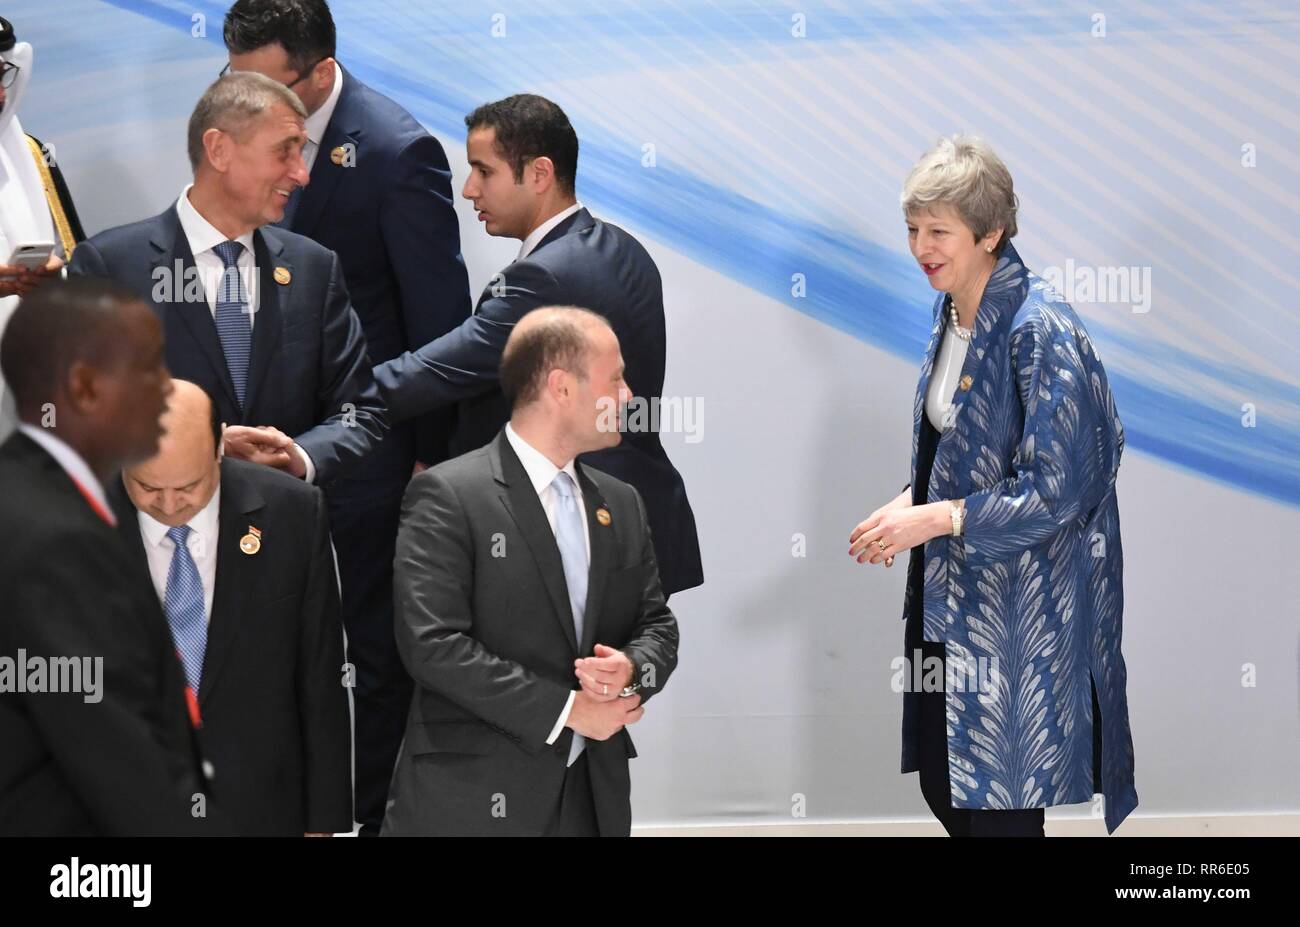 Prime Minister Theresa May speak to leaders during the EU-League of Arab States Summit in Sharm El-Sheikh, Egypt. Stock Photo